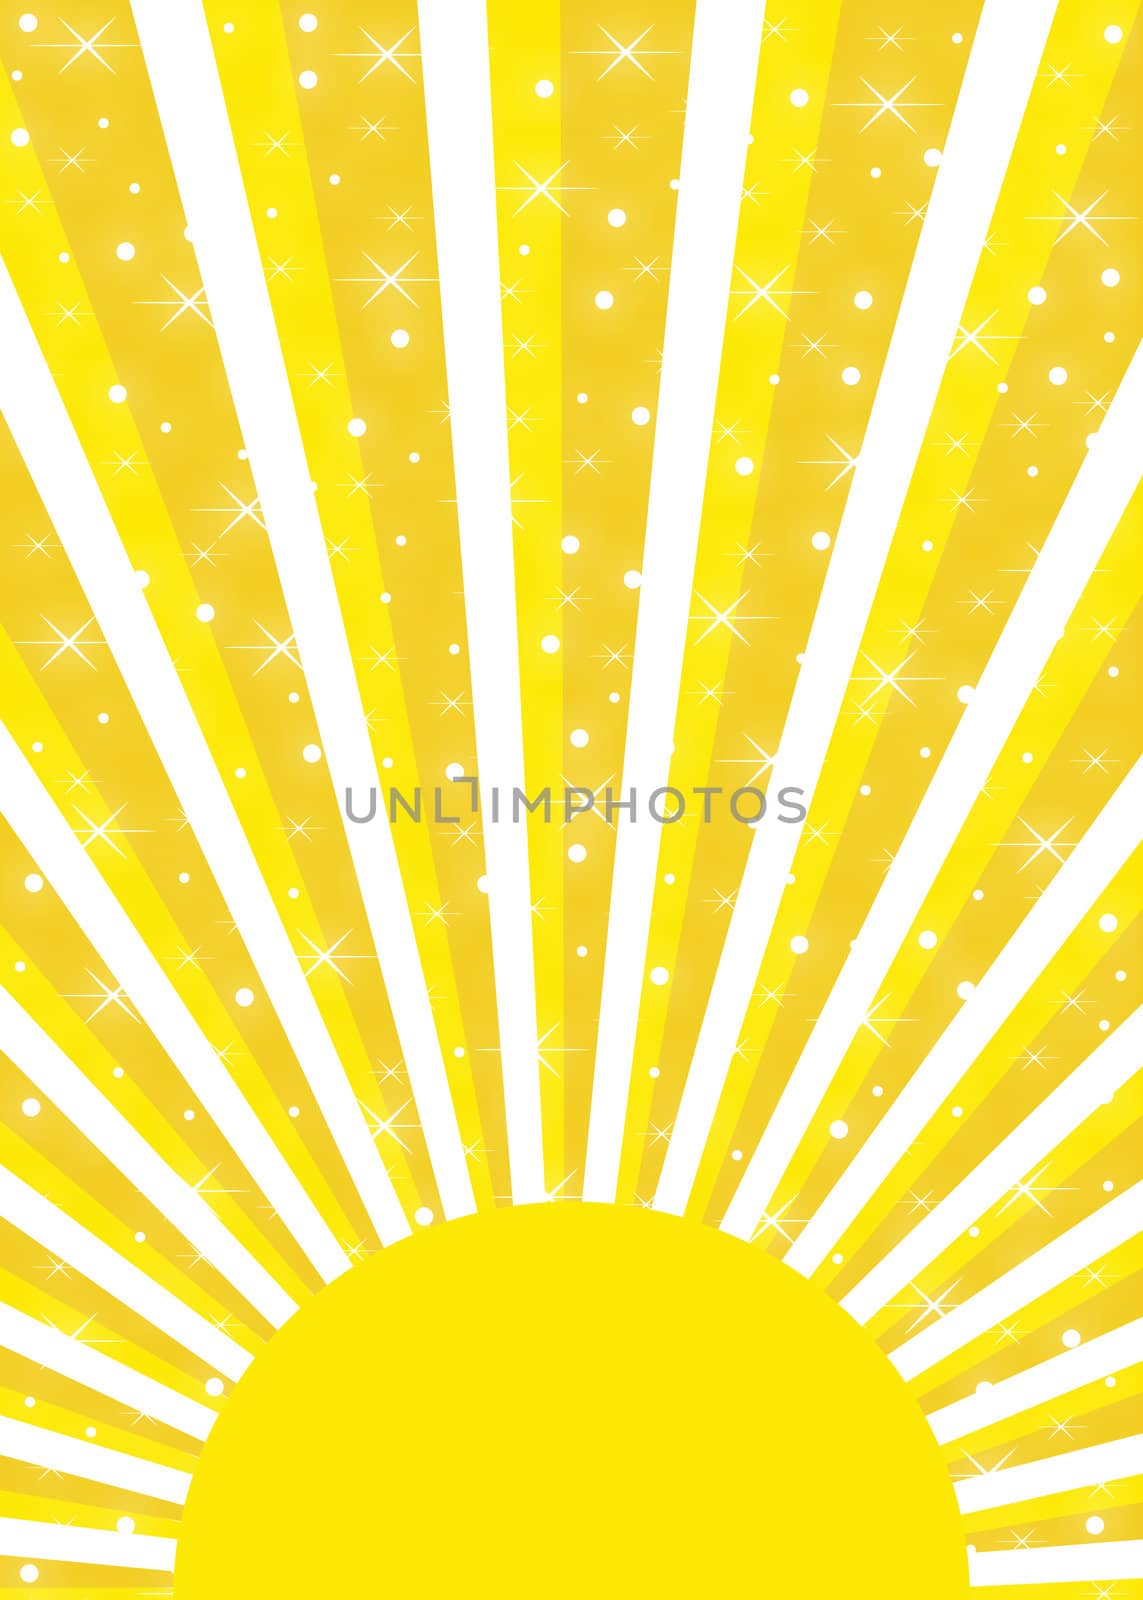 Bright yellow sun with sunrays and multiple glowing stars